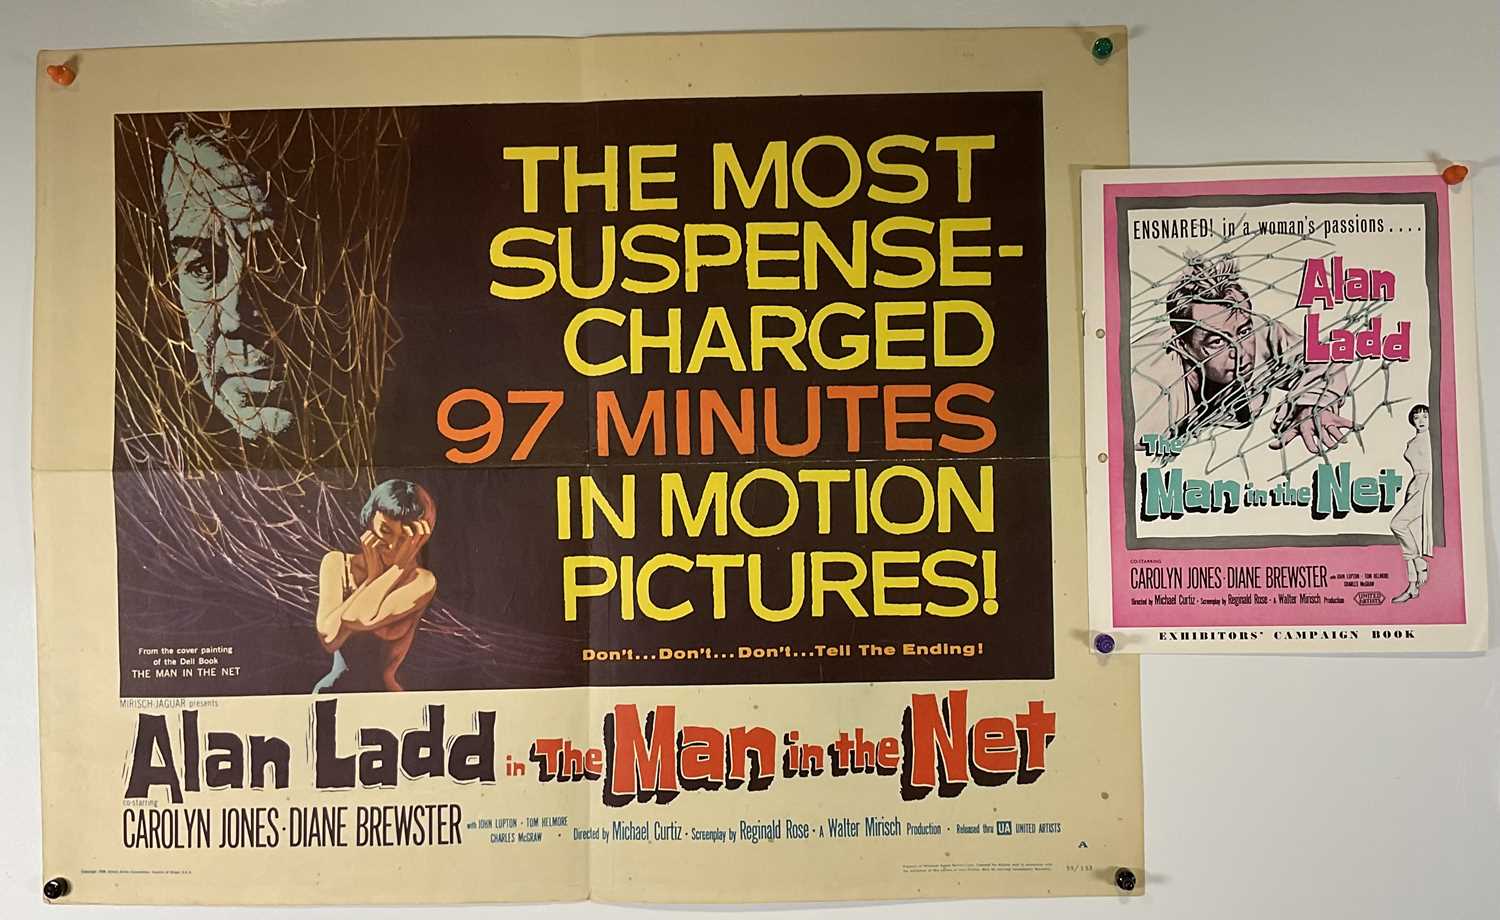 THE MAN IN THE NET (1959) US half sheet together with an exhibitors campaign book, Alan Ladd